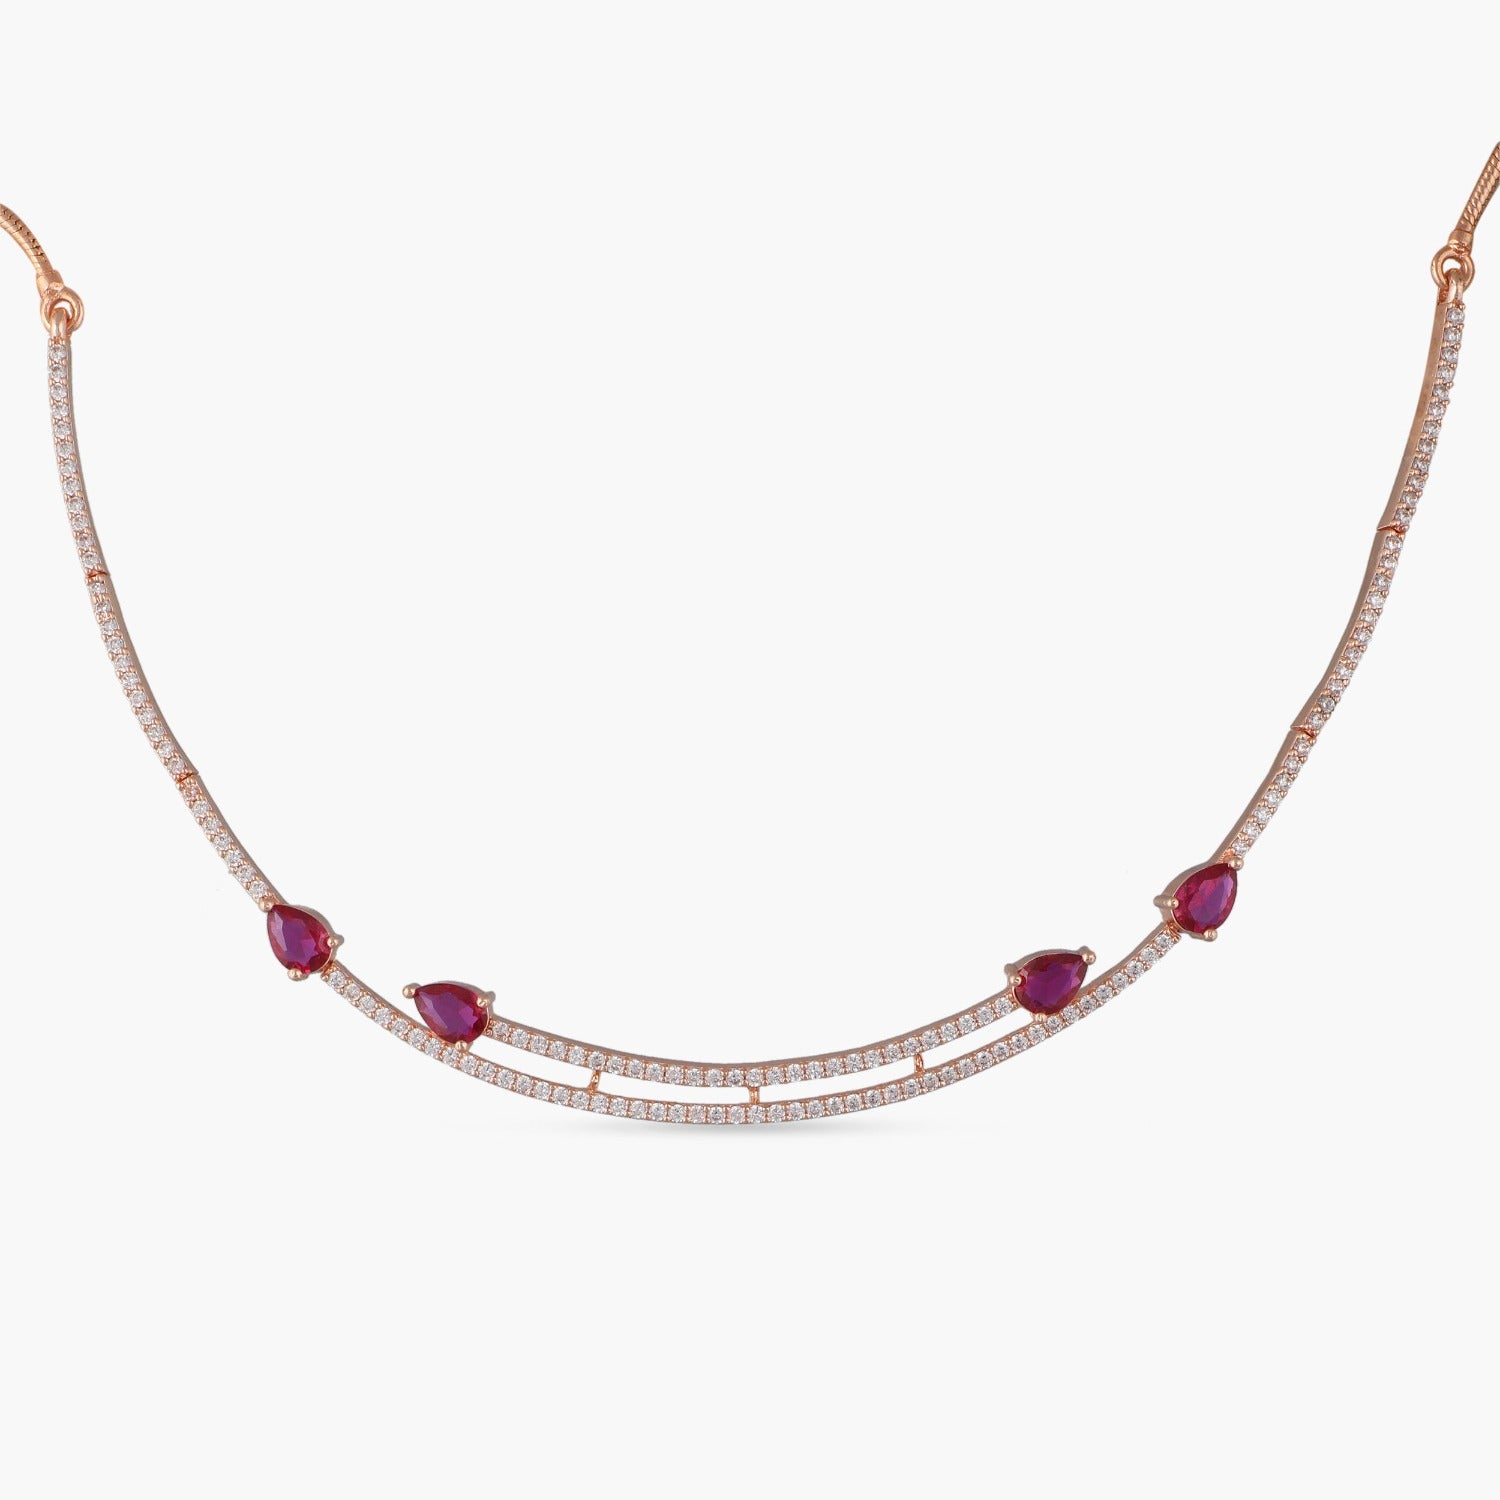 Matsya Pearl String Floral Silver Necklace